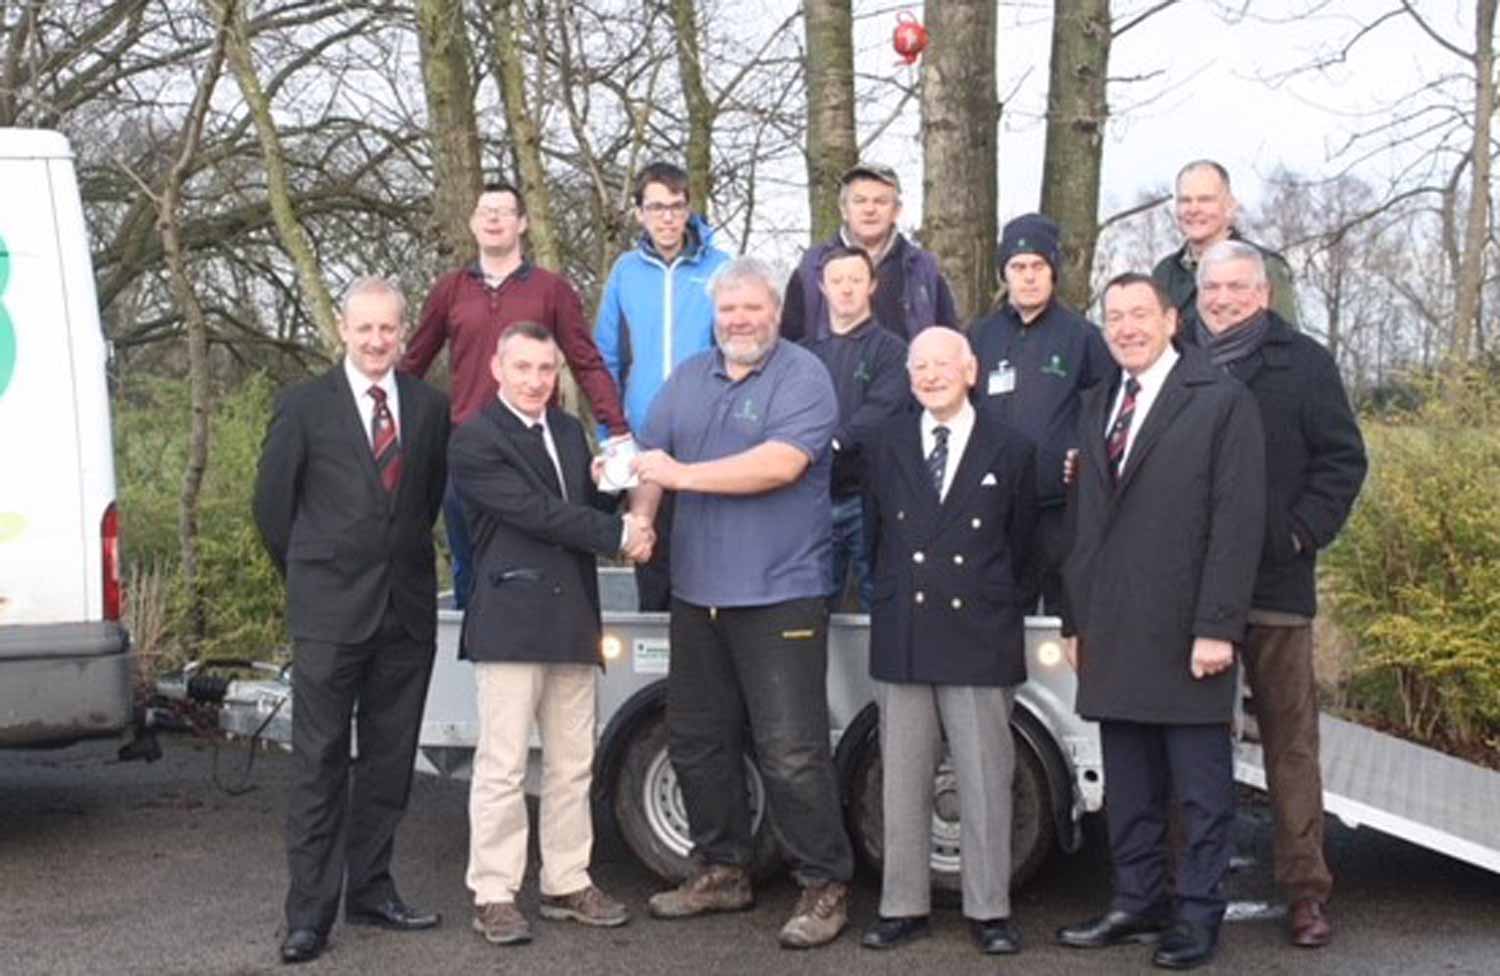 Trailer Cash! Freemasons Sean McPartland, Joe Cocker, Worshipful Master Harrogate & Claro Lodge; Phil Airey Horticap operations manager; Freemasons Tim Wilkinson, Michael Baxter and ohn Birkenshaw, watched on by a group of Horticap student on the trailer behind